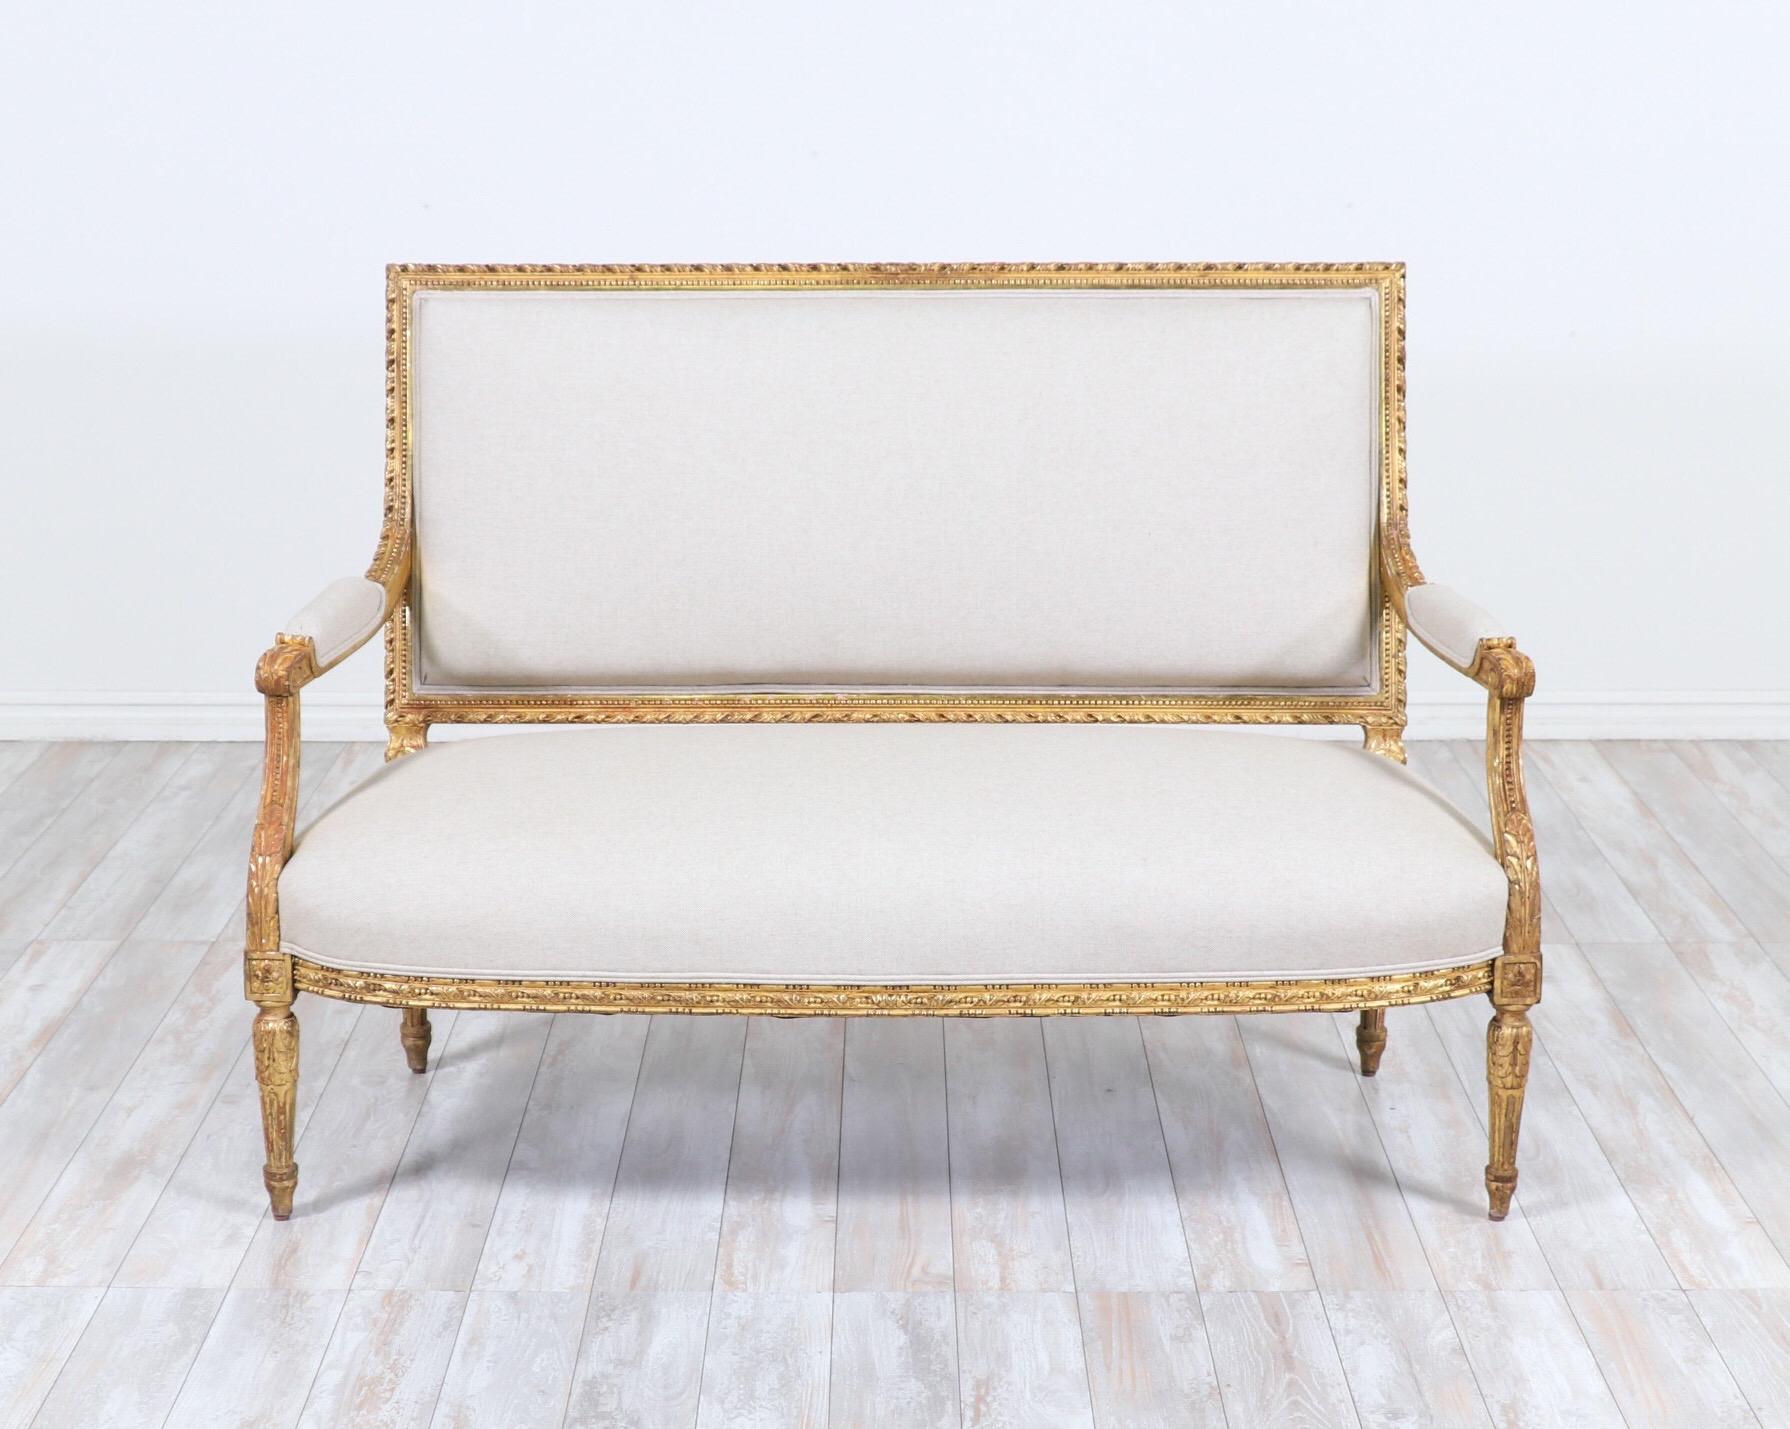 Exquisite, French 1920s Louis XVI-style giltwood settee with new cotton canvas linen upholstery.

Simple lines, intricately carved decorations and original 22-karat gold-gilding define this elegant French settee. 

The gilt finish is naturally